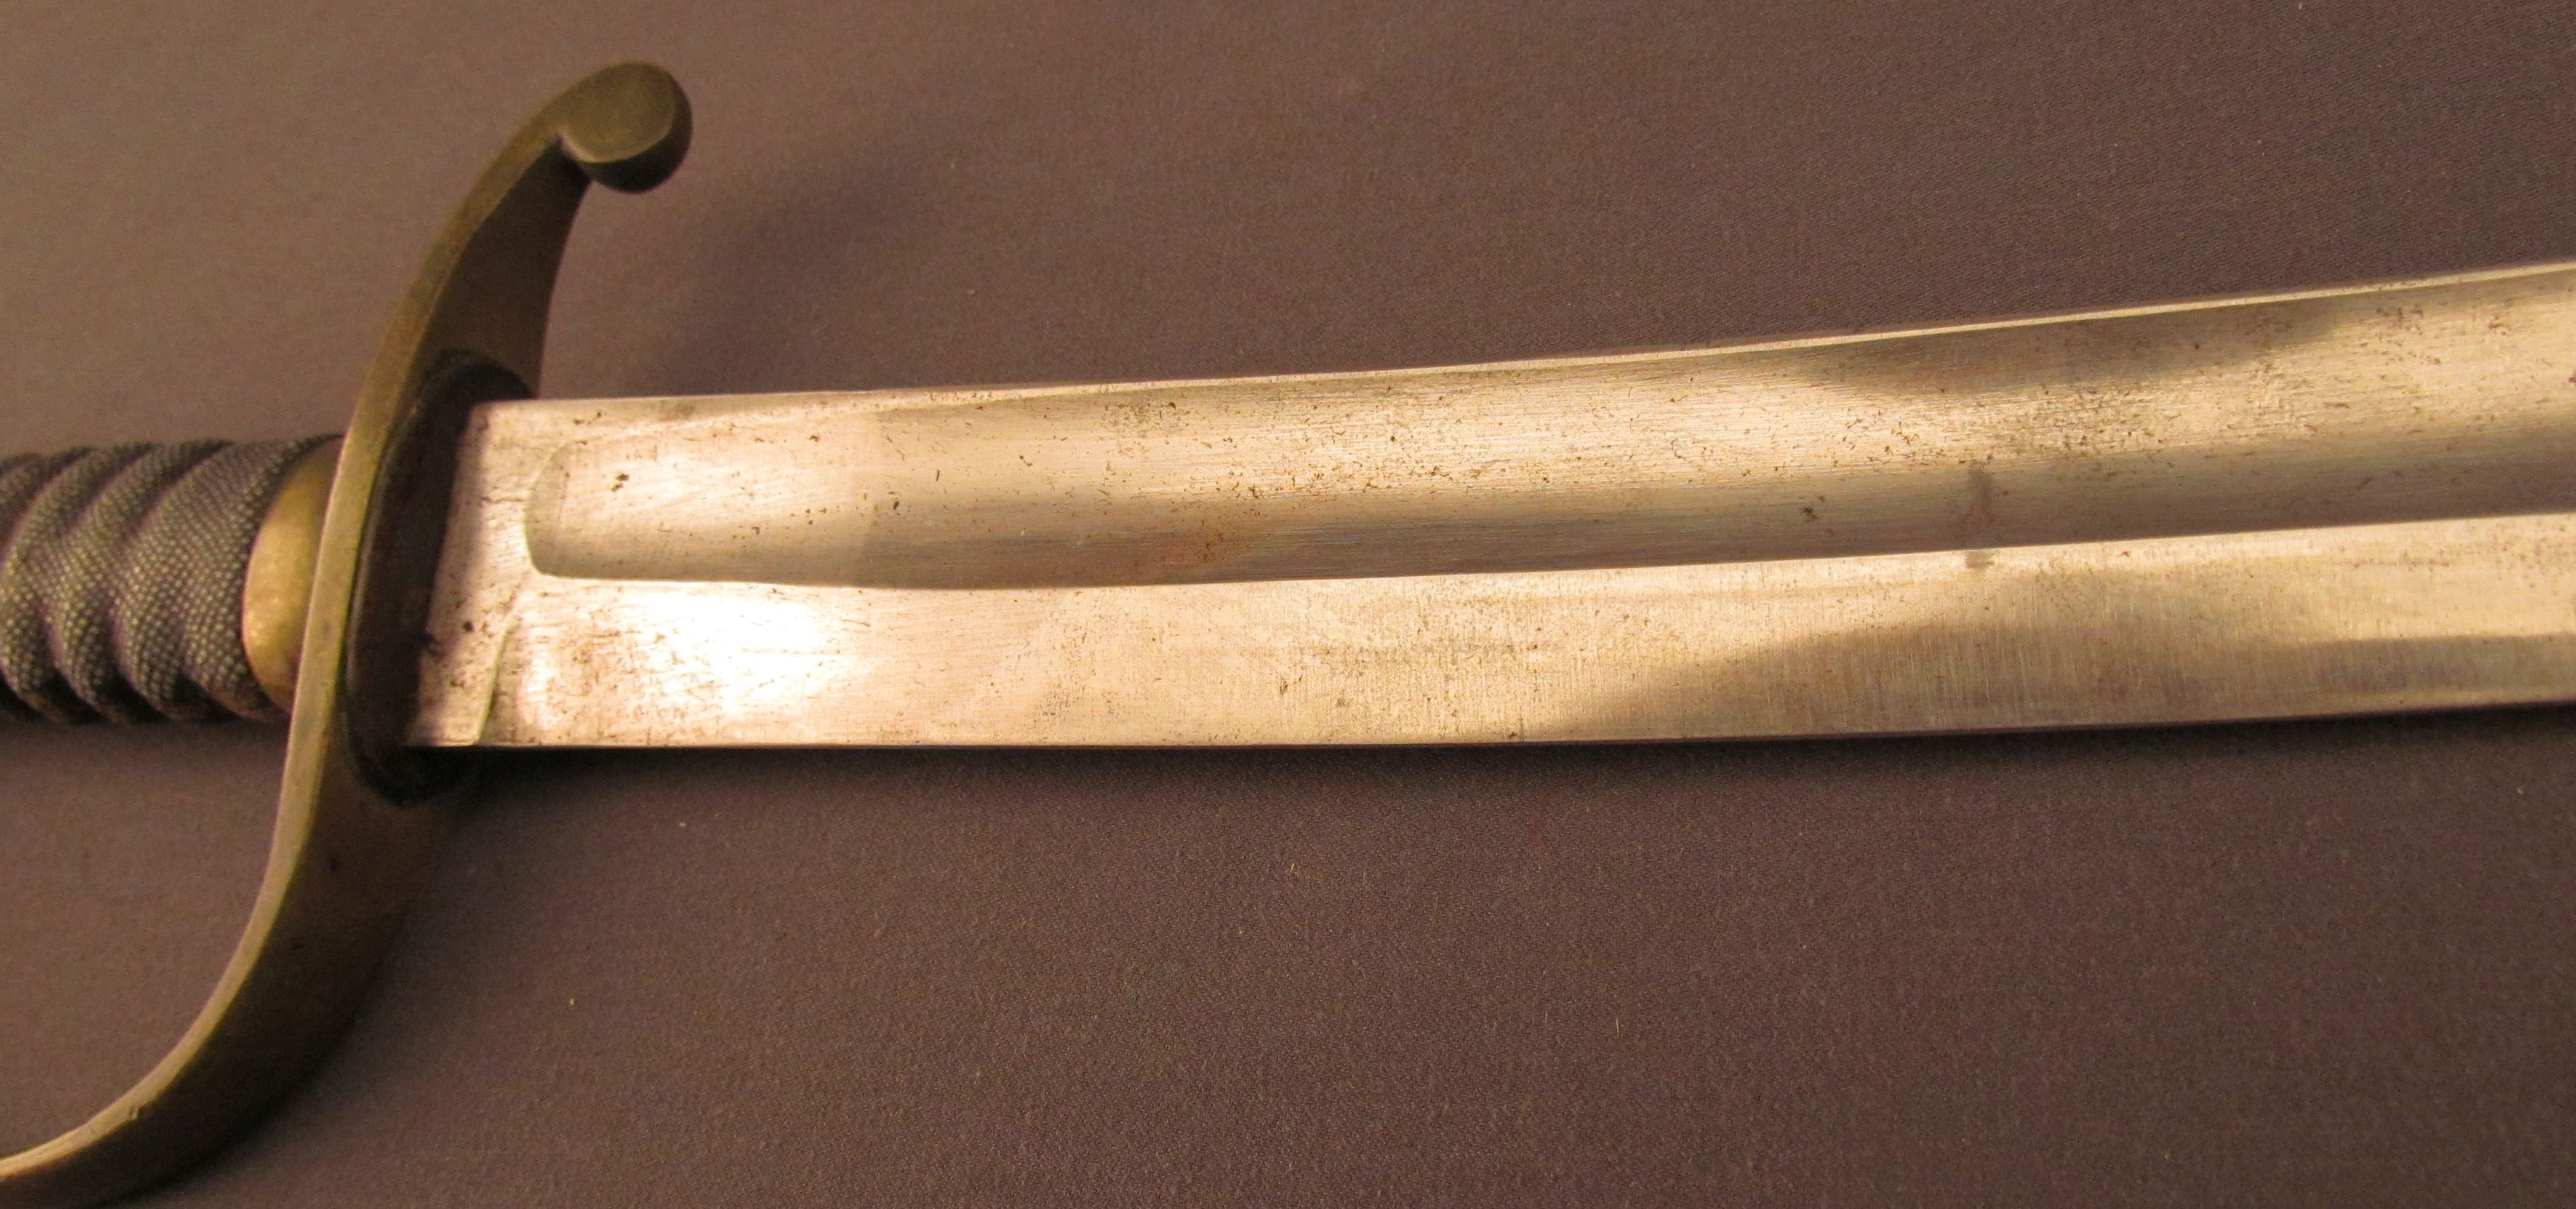 British Police Short Sword and Scabbard